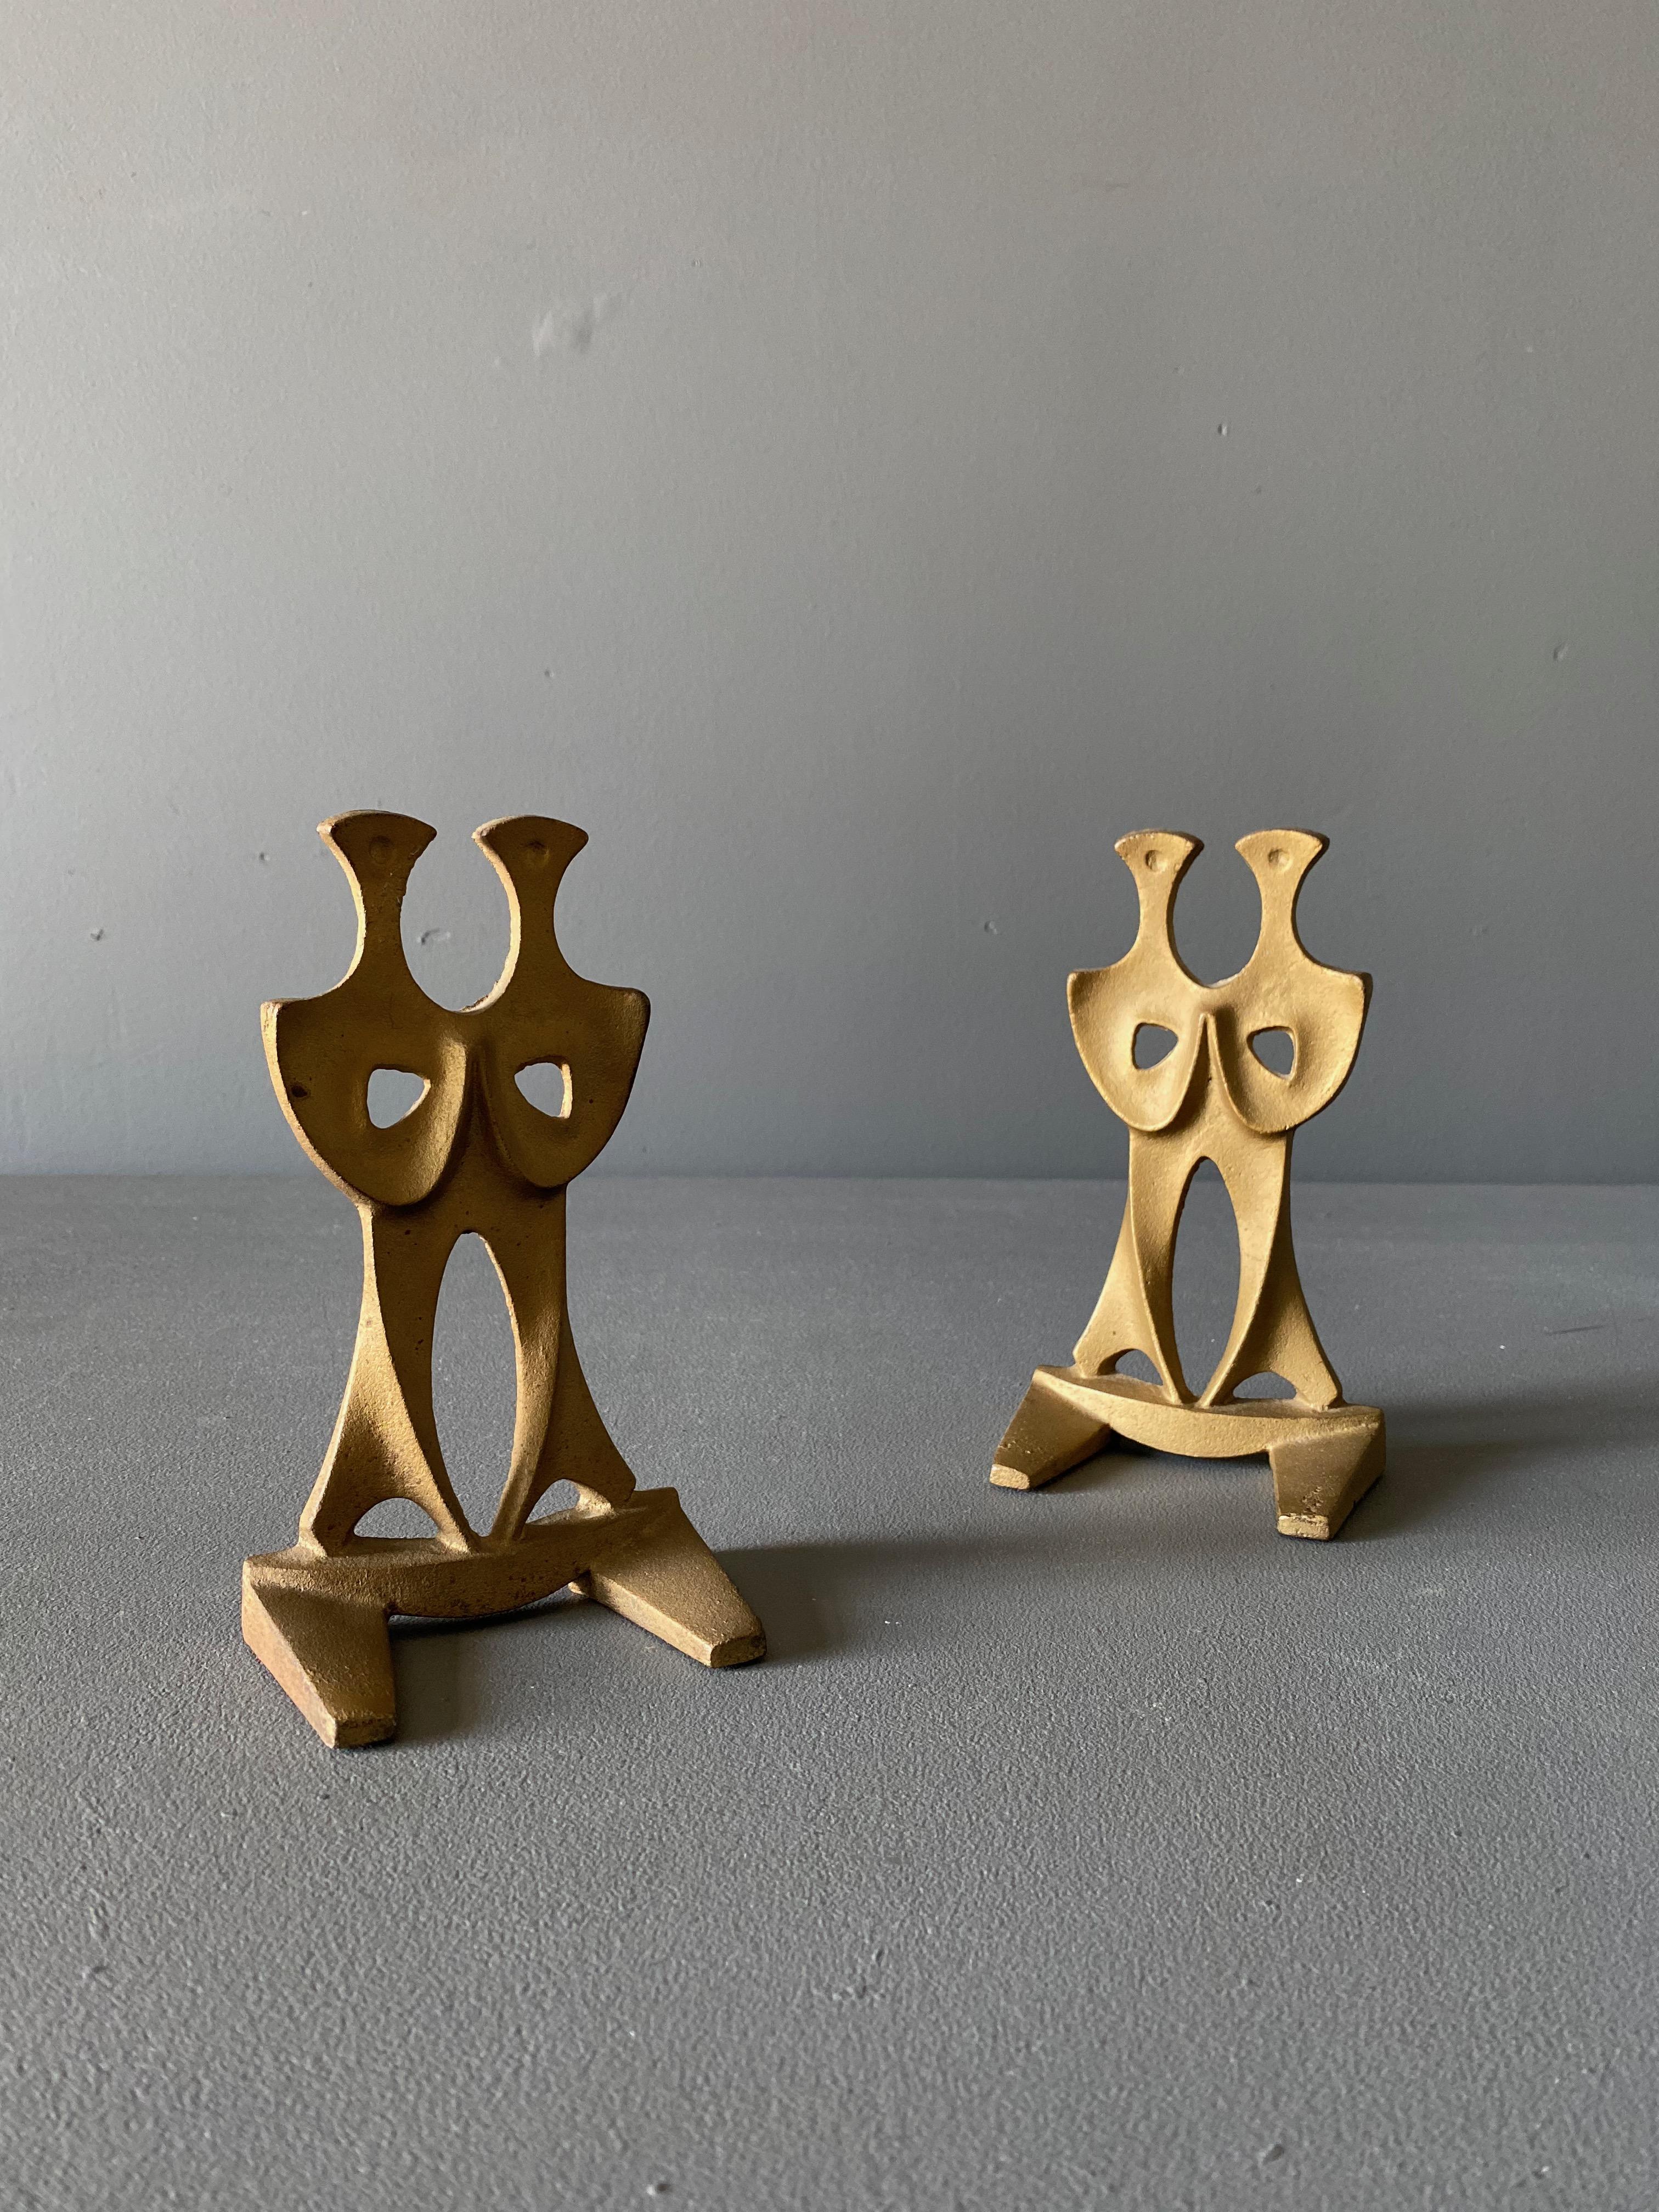 Mid-Century Modern Sculptural Cast Iron Bookends in the Manner of Frederick Weinberg, circa 1955